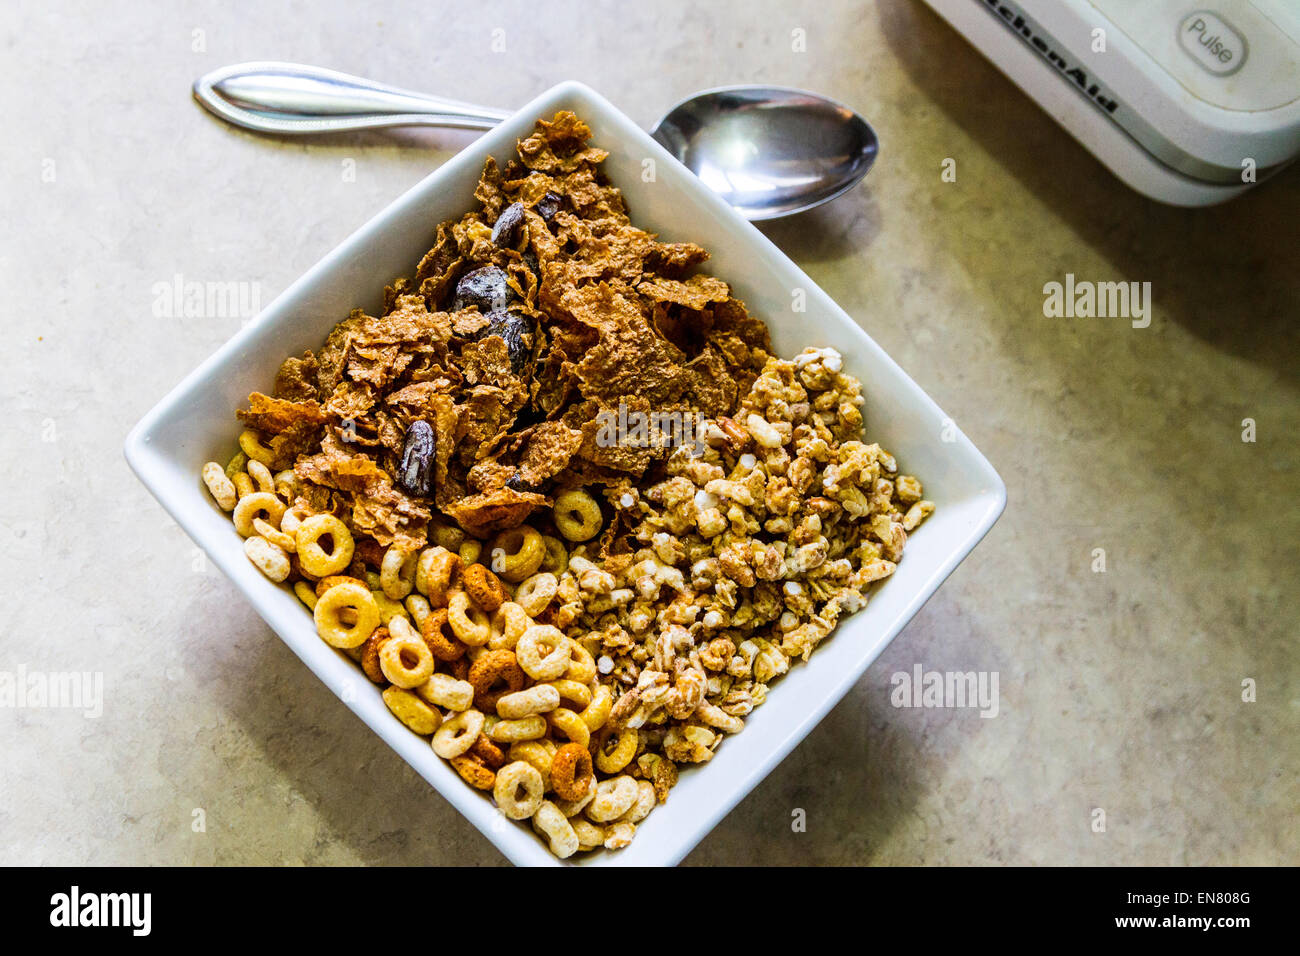 Cheerio's, Kashi Go Lean Crunch, and store brand raisin bran cereals in a square bowl for breakfast. Stock Photo